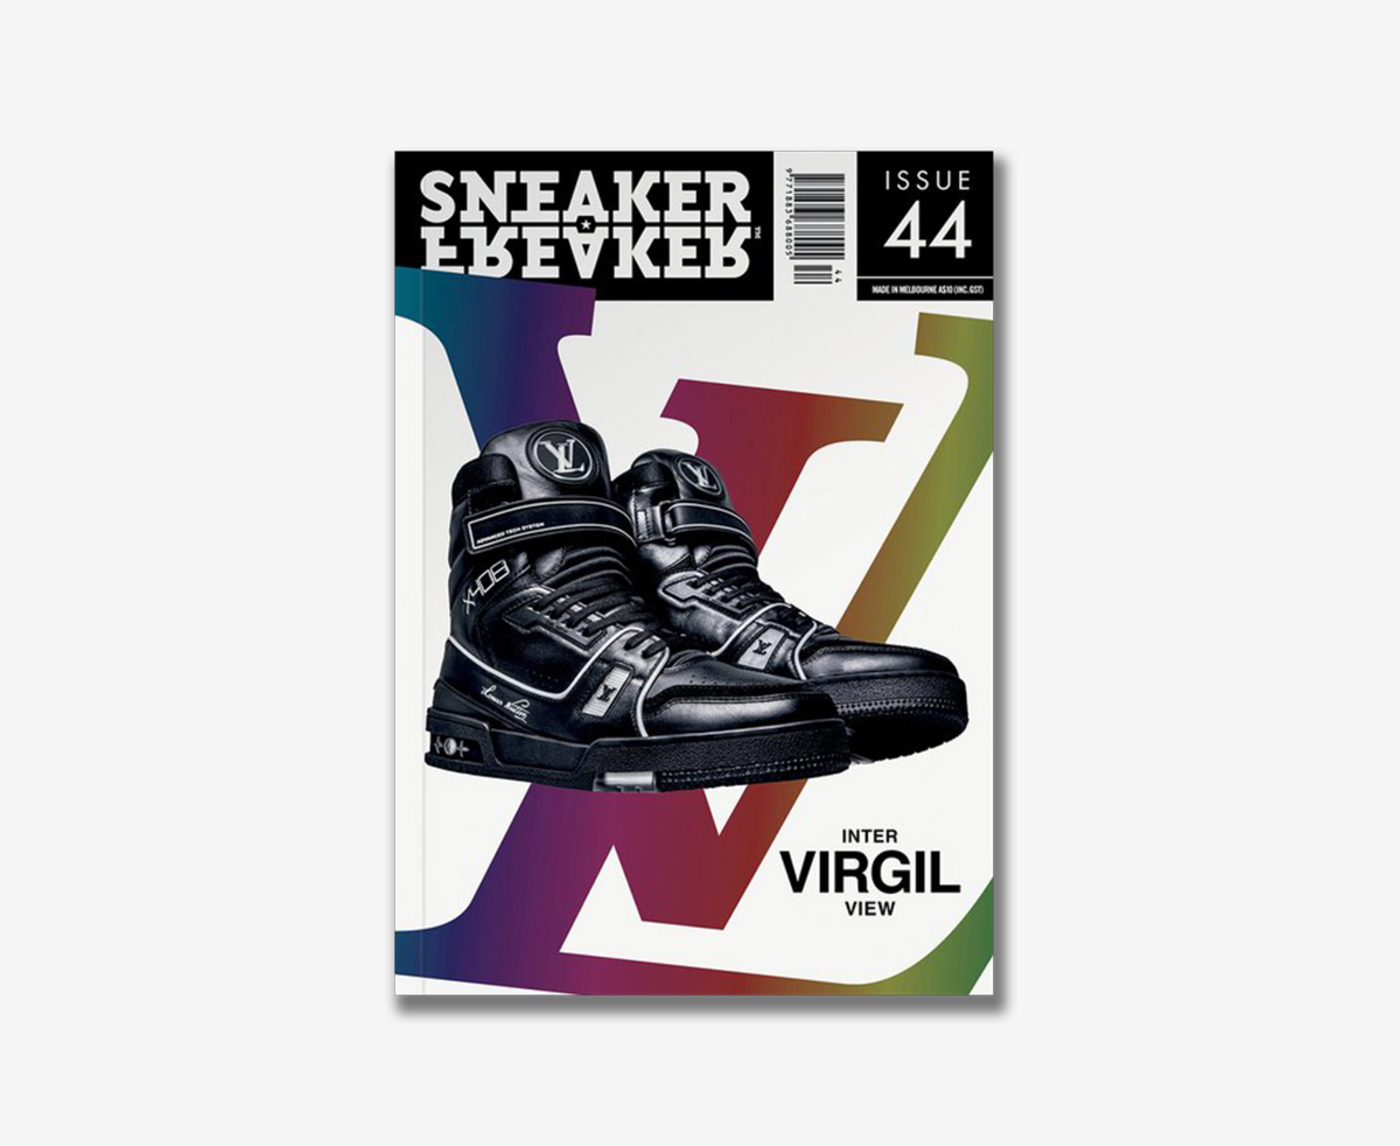 Something's Off By Virgil Abloh & Soled Out By Sneaker Freaker